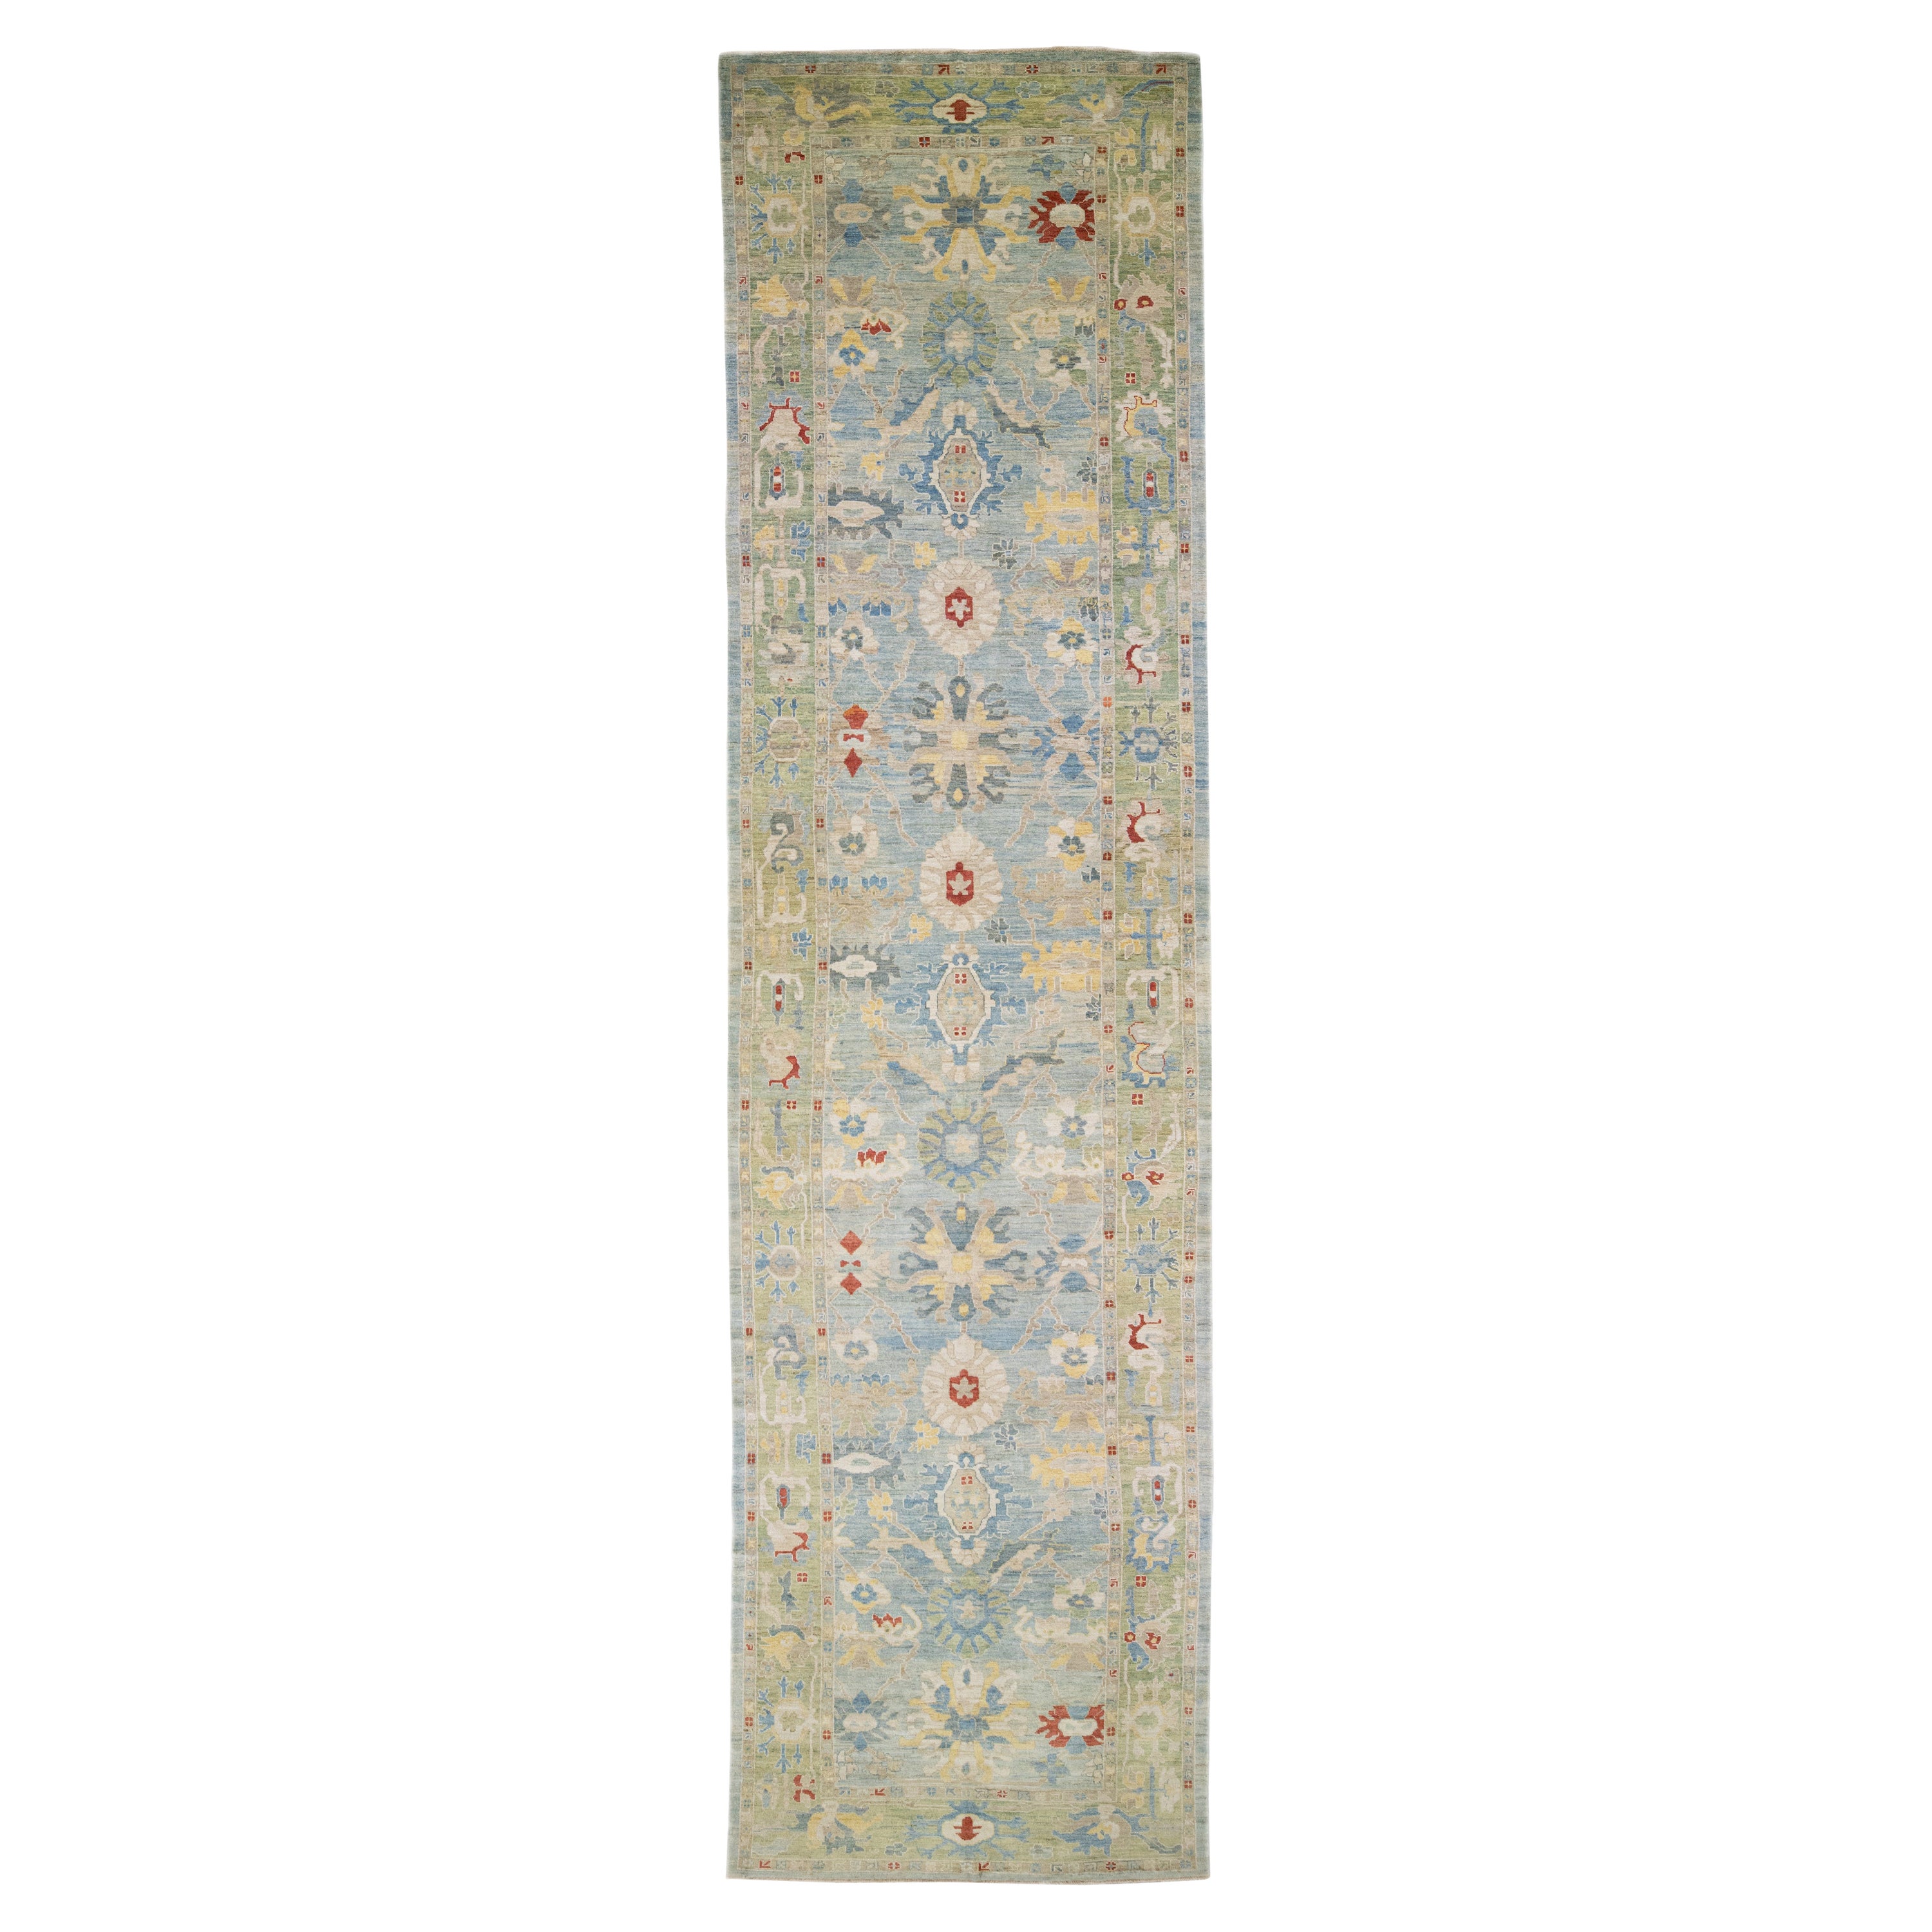 Contemporary Mahal Blue Handmade Wool Runner with Floral Design